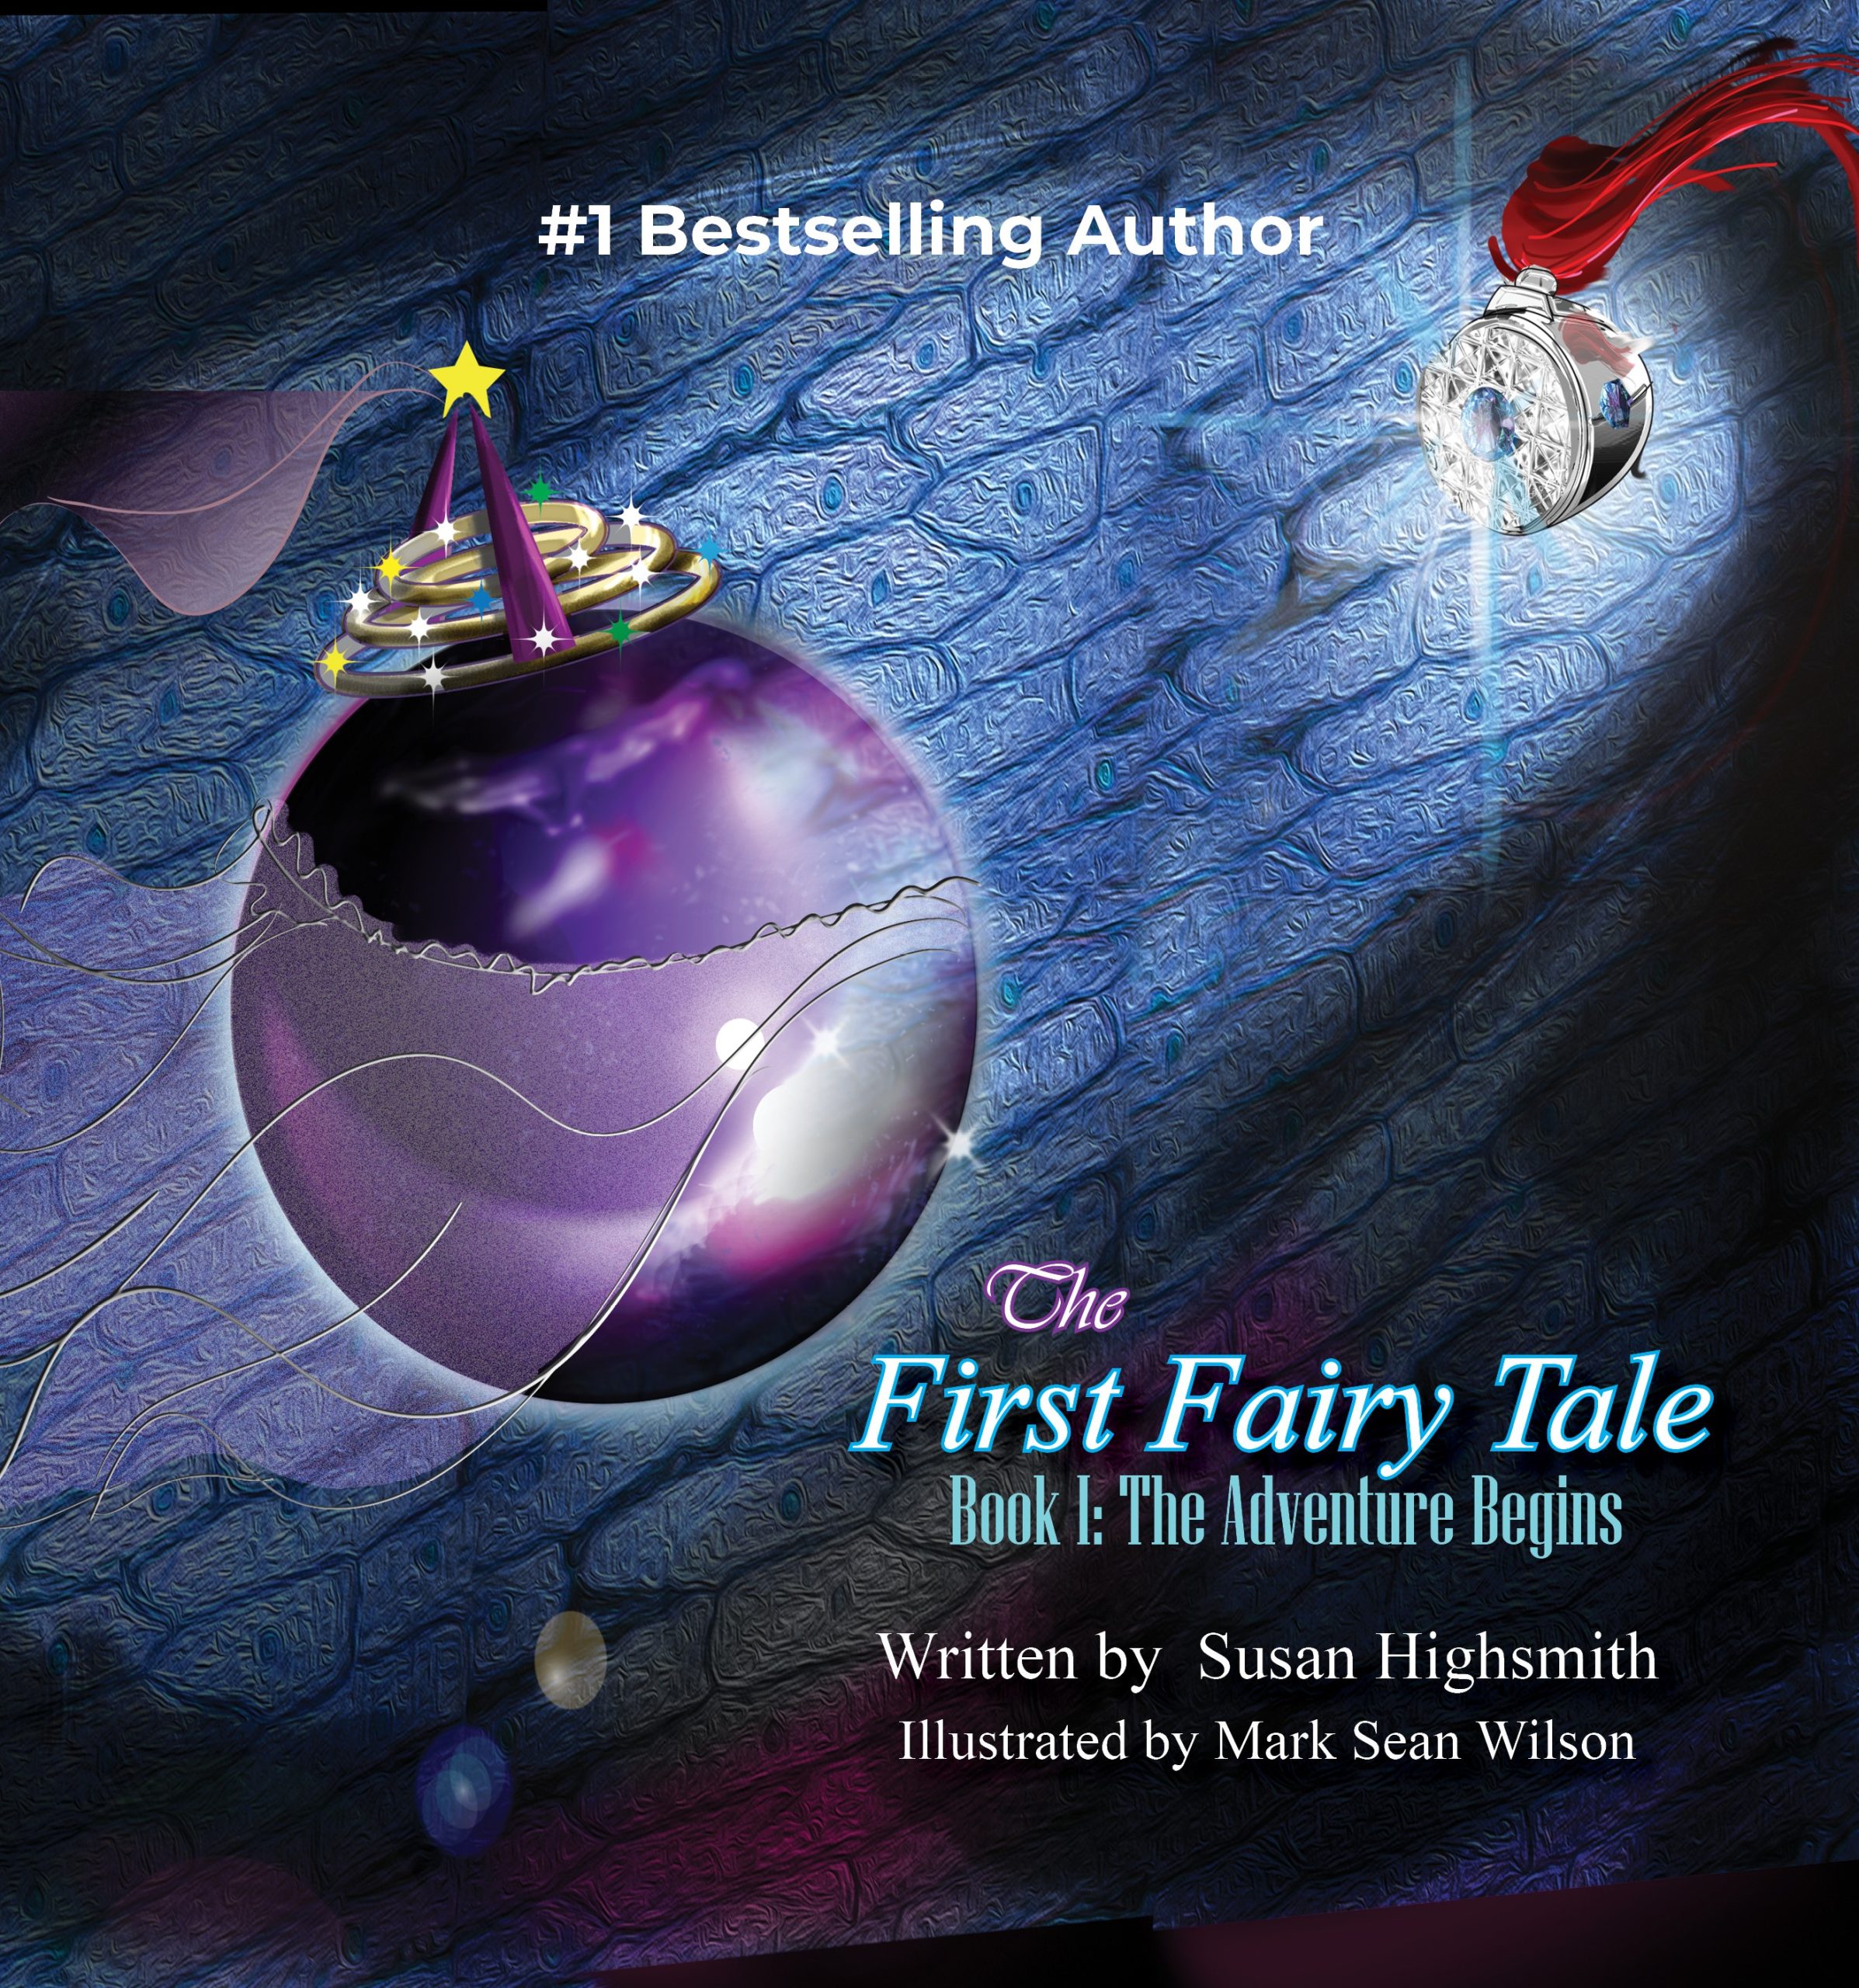 The First Fairy Tale I: The Adventure Begins